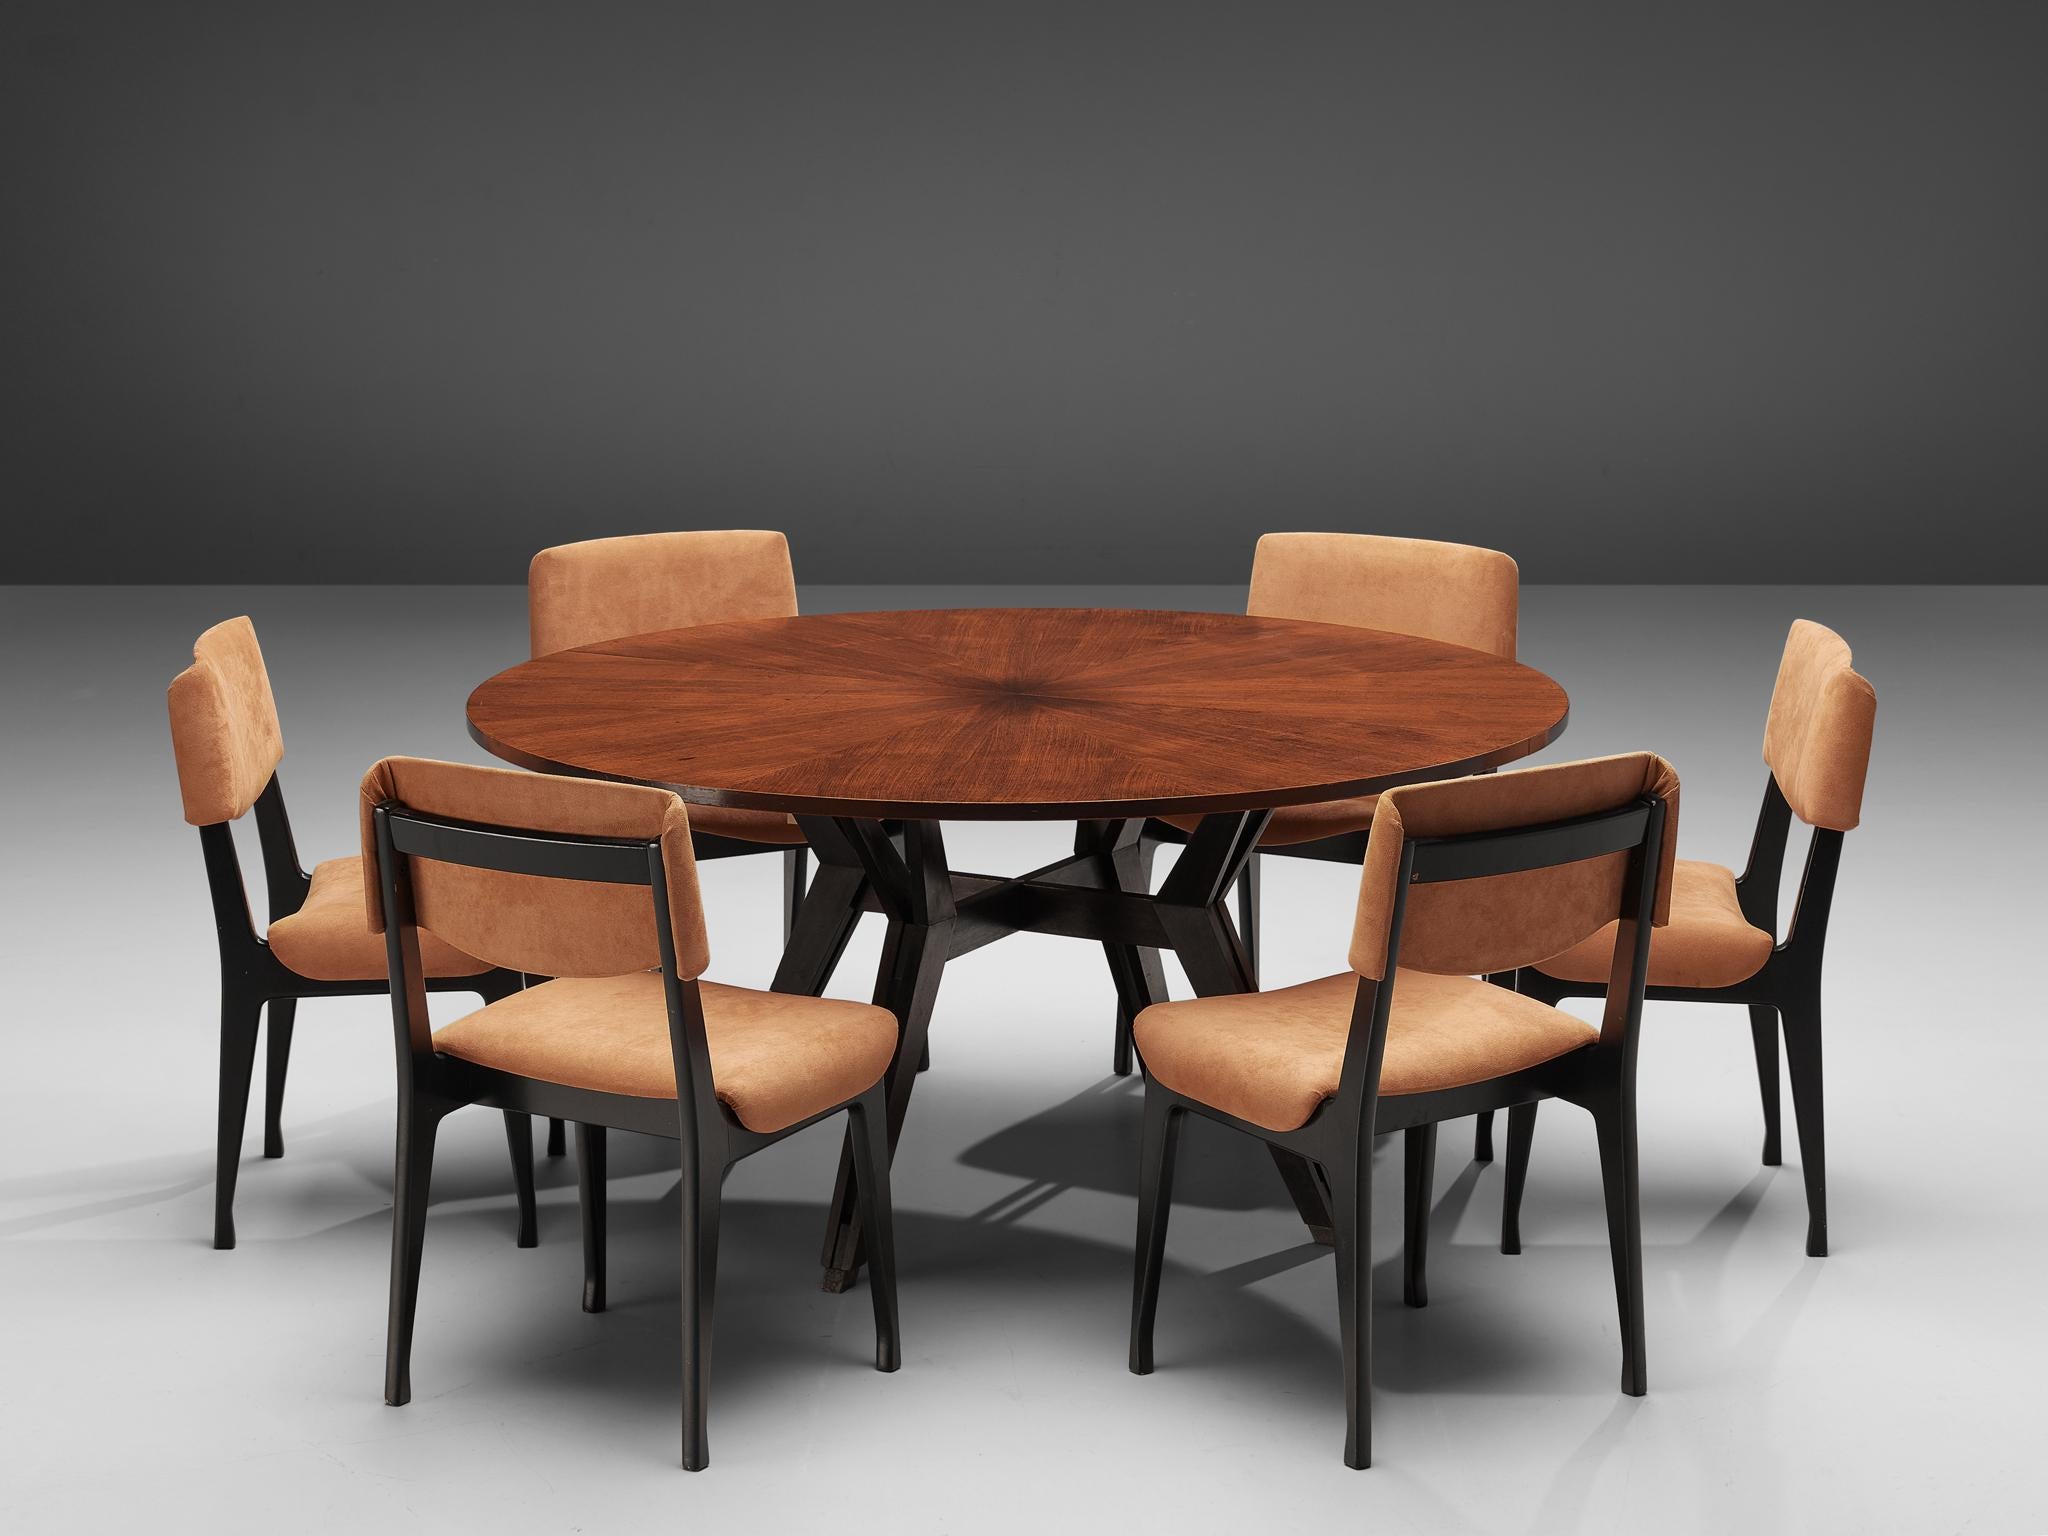 MIM Roma, set of six dining chairs, wood, orange velour upholstery, Italy, 1960s

This set of six dining chairs for MIM Roma shows a well balanced design. With its angular tapered legs the frame gets a special look especially sideways. The seats